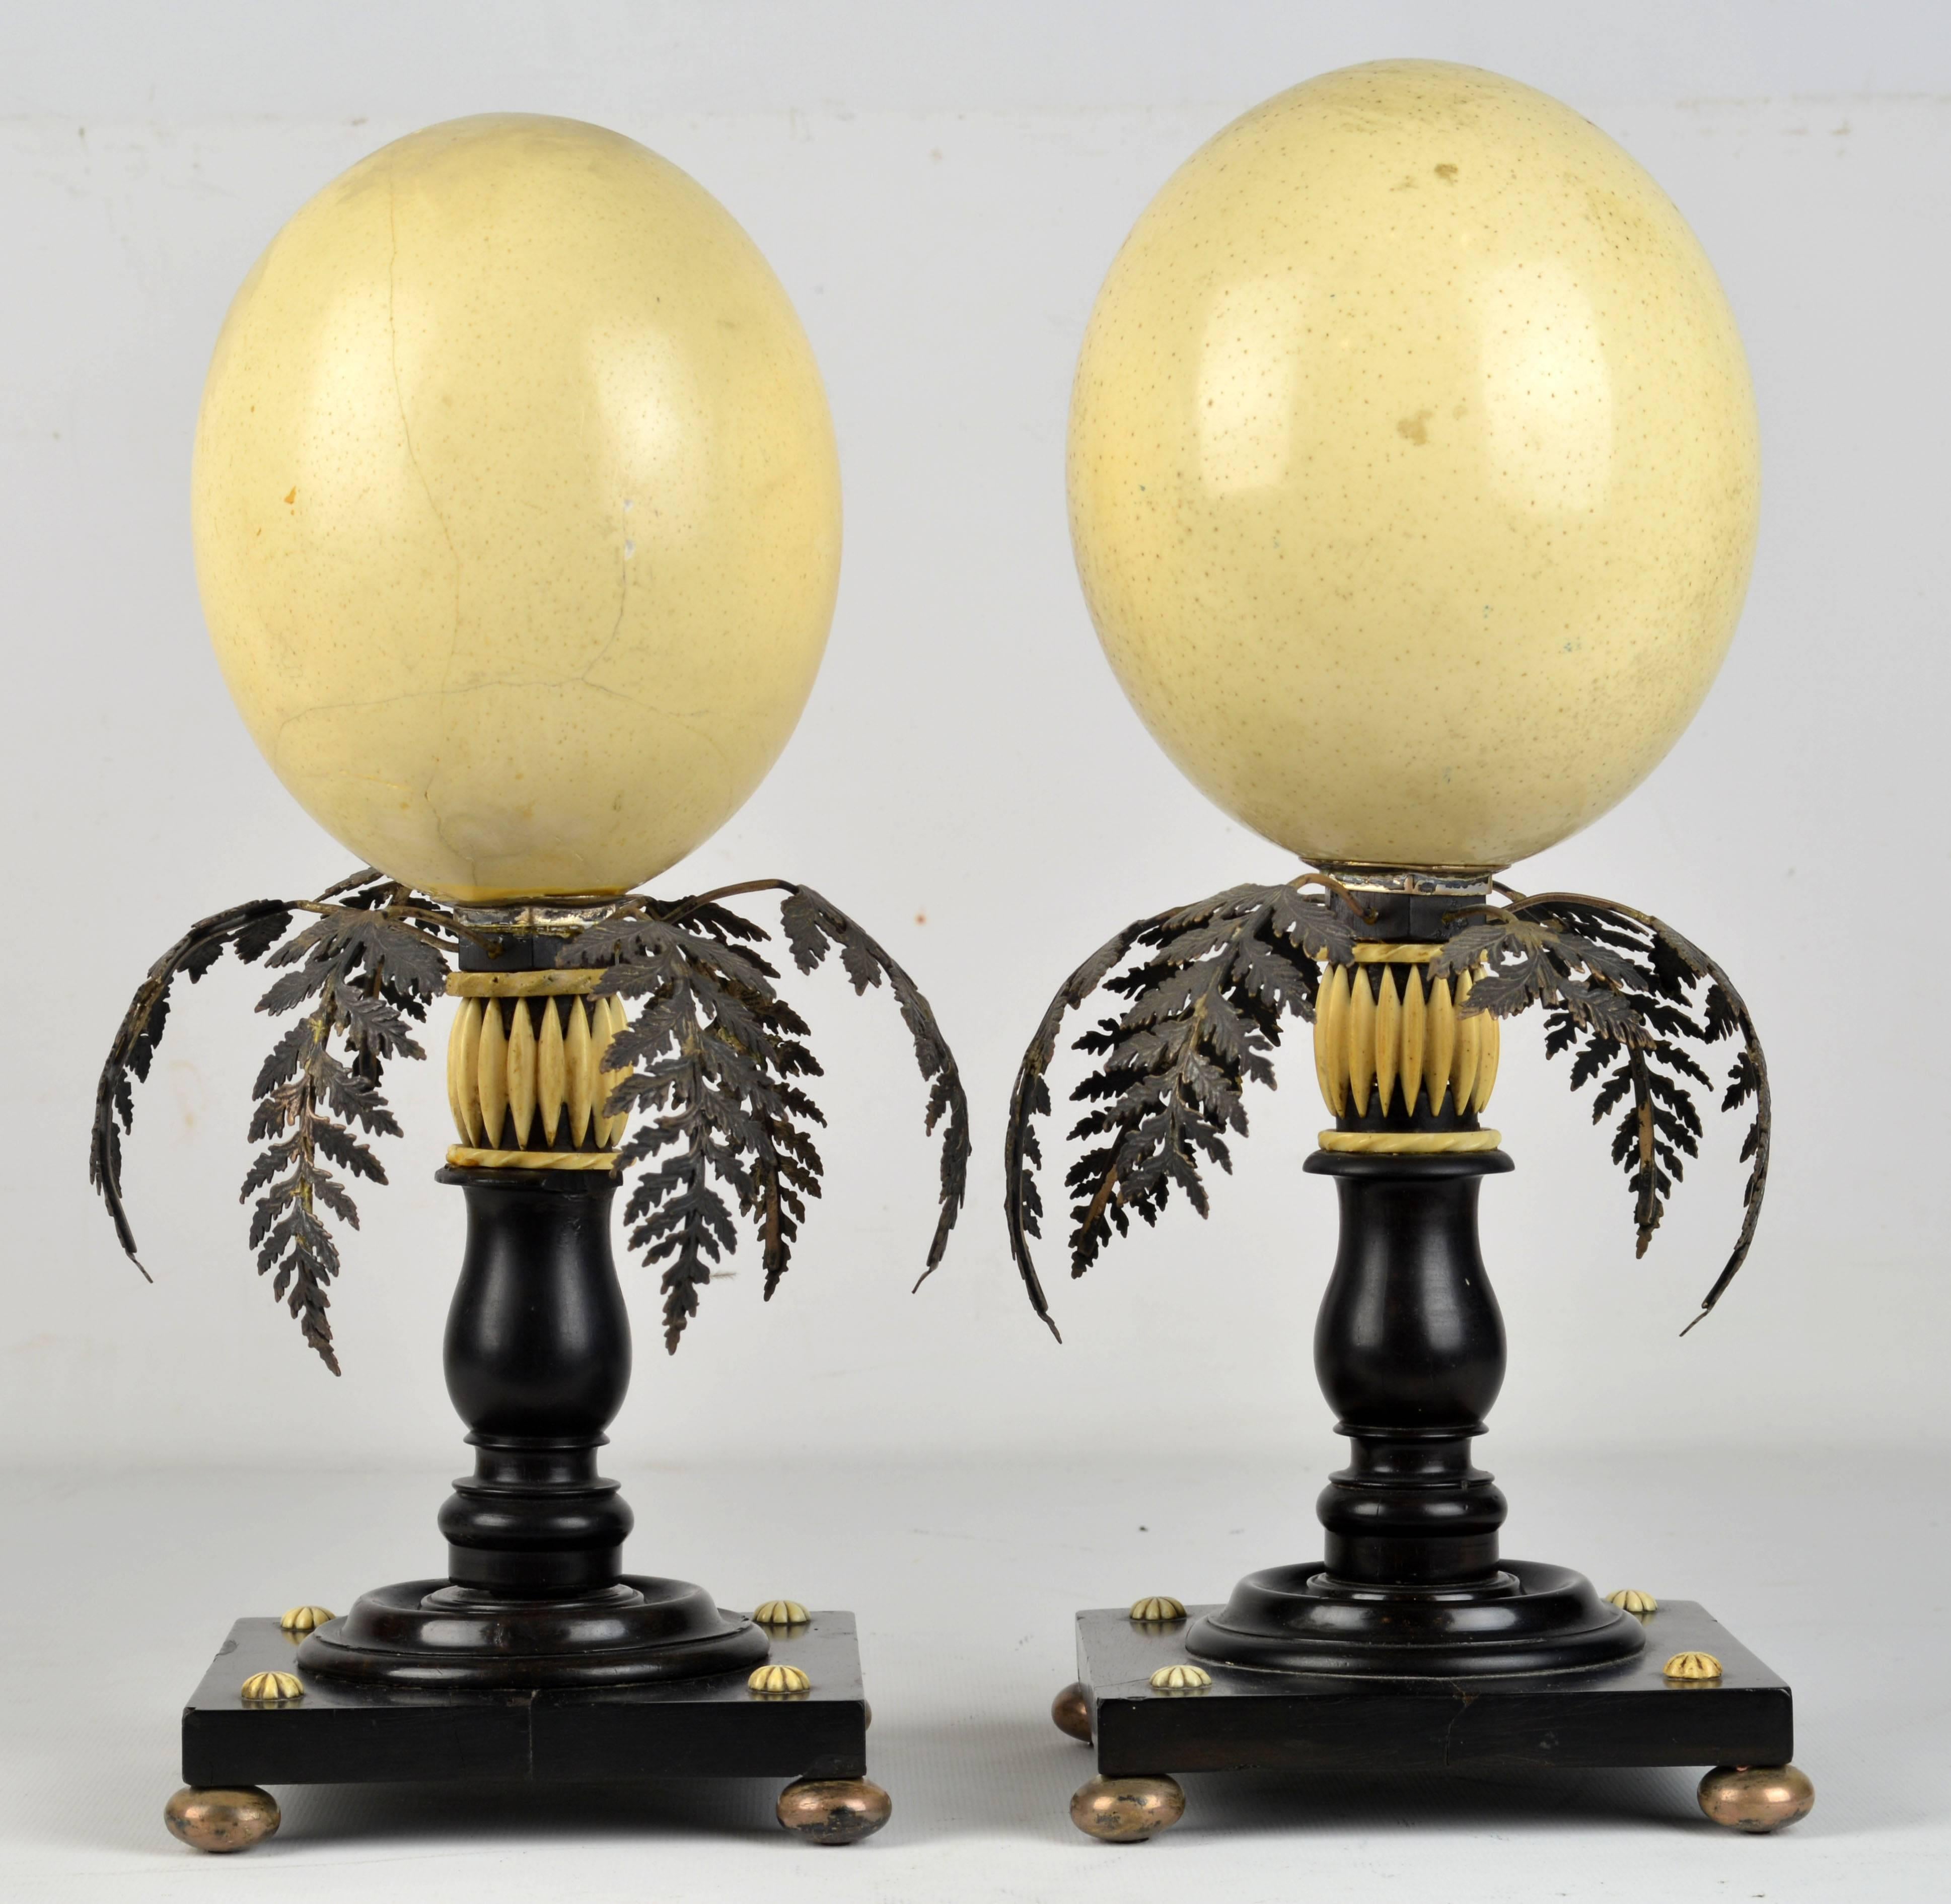 This pair of ostrich eggs on stands would be the discerning collector's choice in the old Austrian Hungarian Empire where exotic artifacts in a fine home were a must. The two eggs, standing 13.5 in. tall, are mounted on wooden ebonized stands on